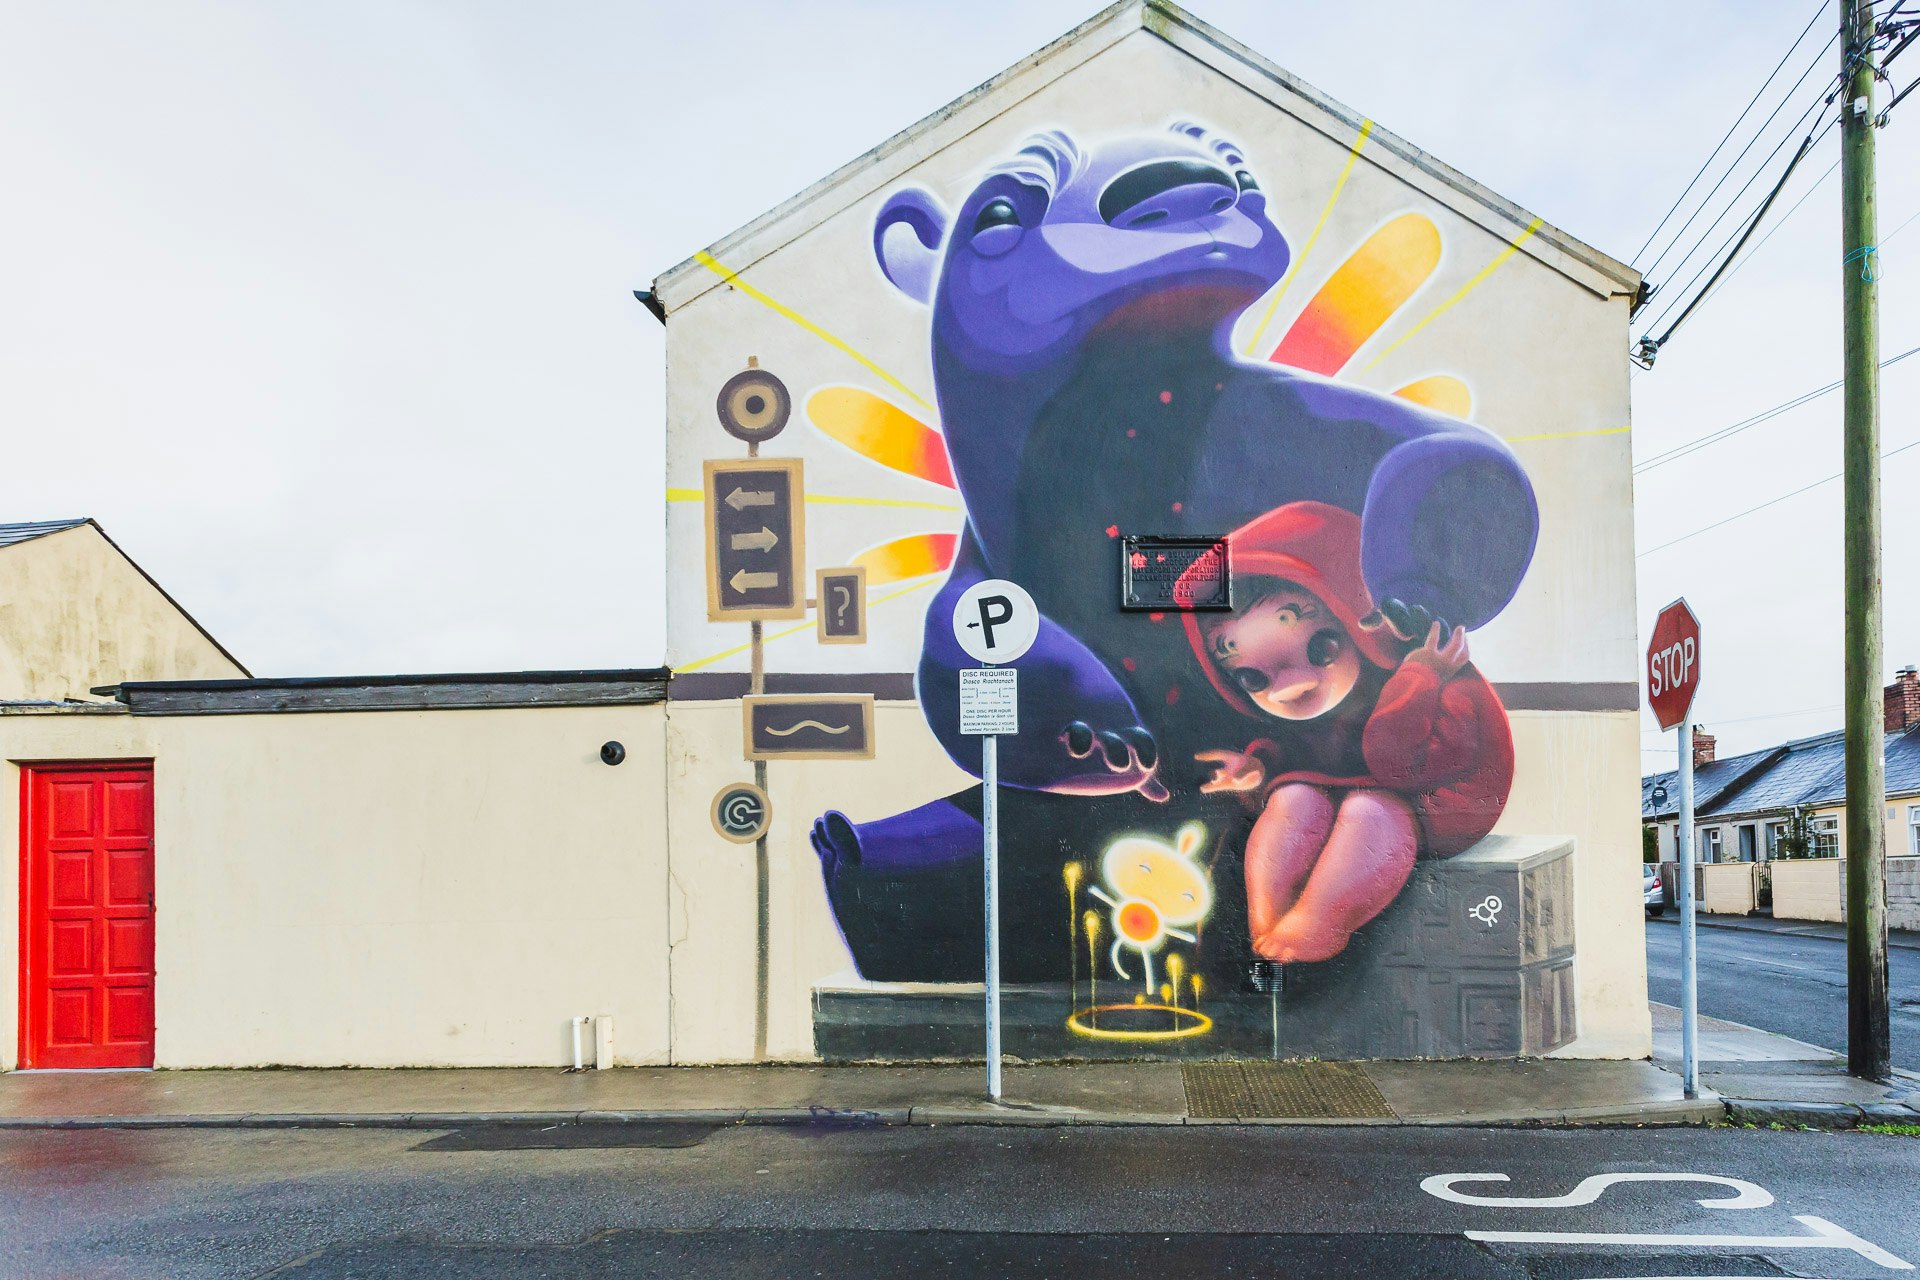 A street art mural of a purple bear hugging a small girl in a red jacket.